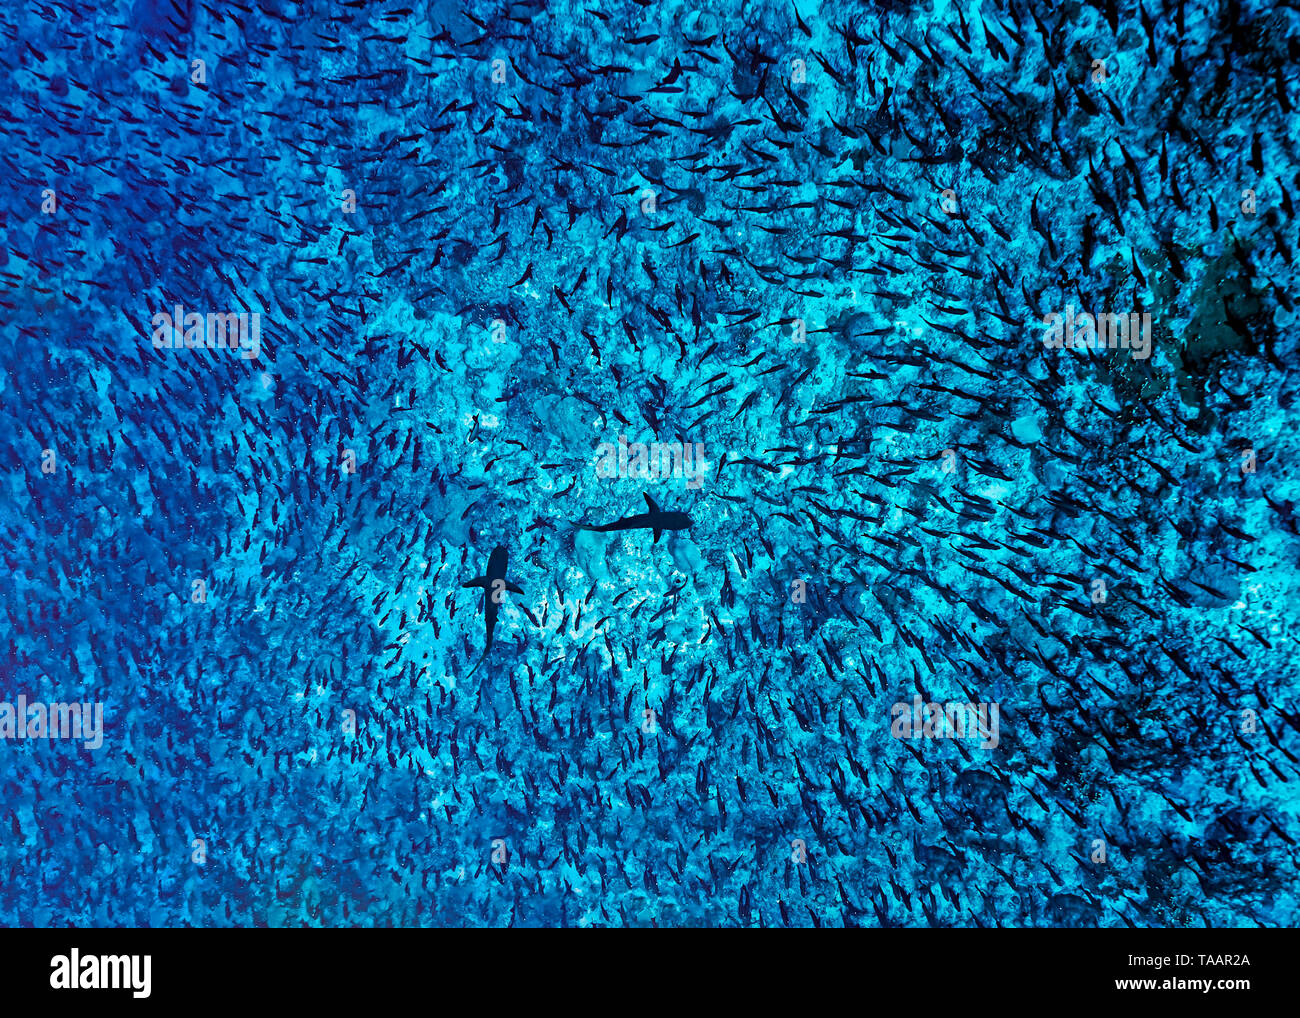 Sharks going into school in Tuamotus Islands of French Polynesia. Two sharks at the bottom in the middle of large school of fish seen from above. Stock Photo